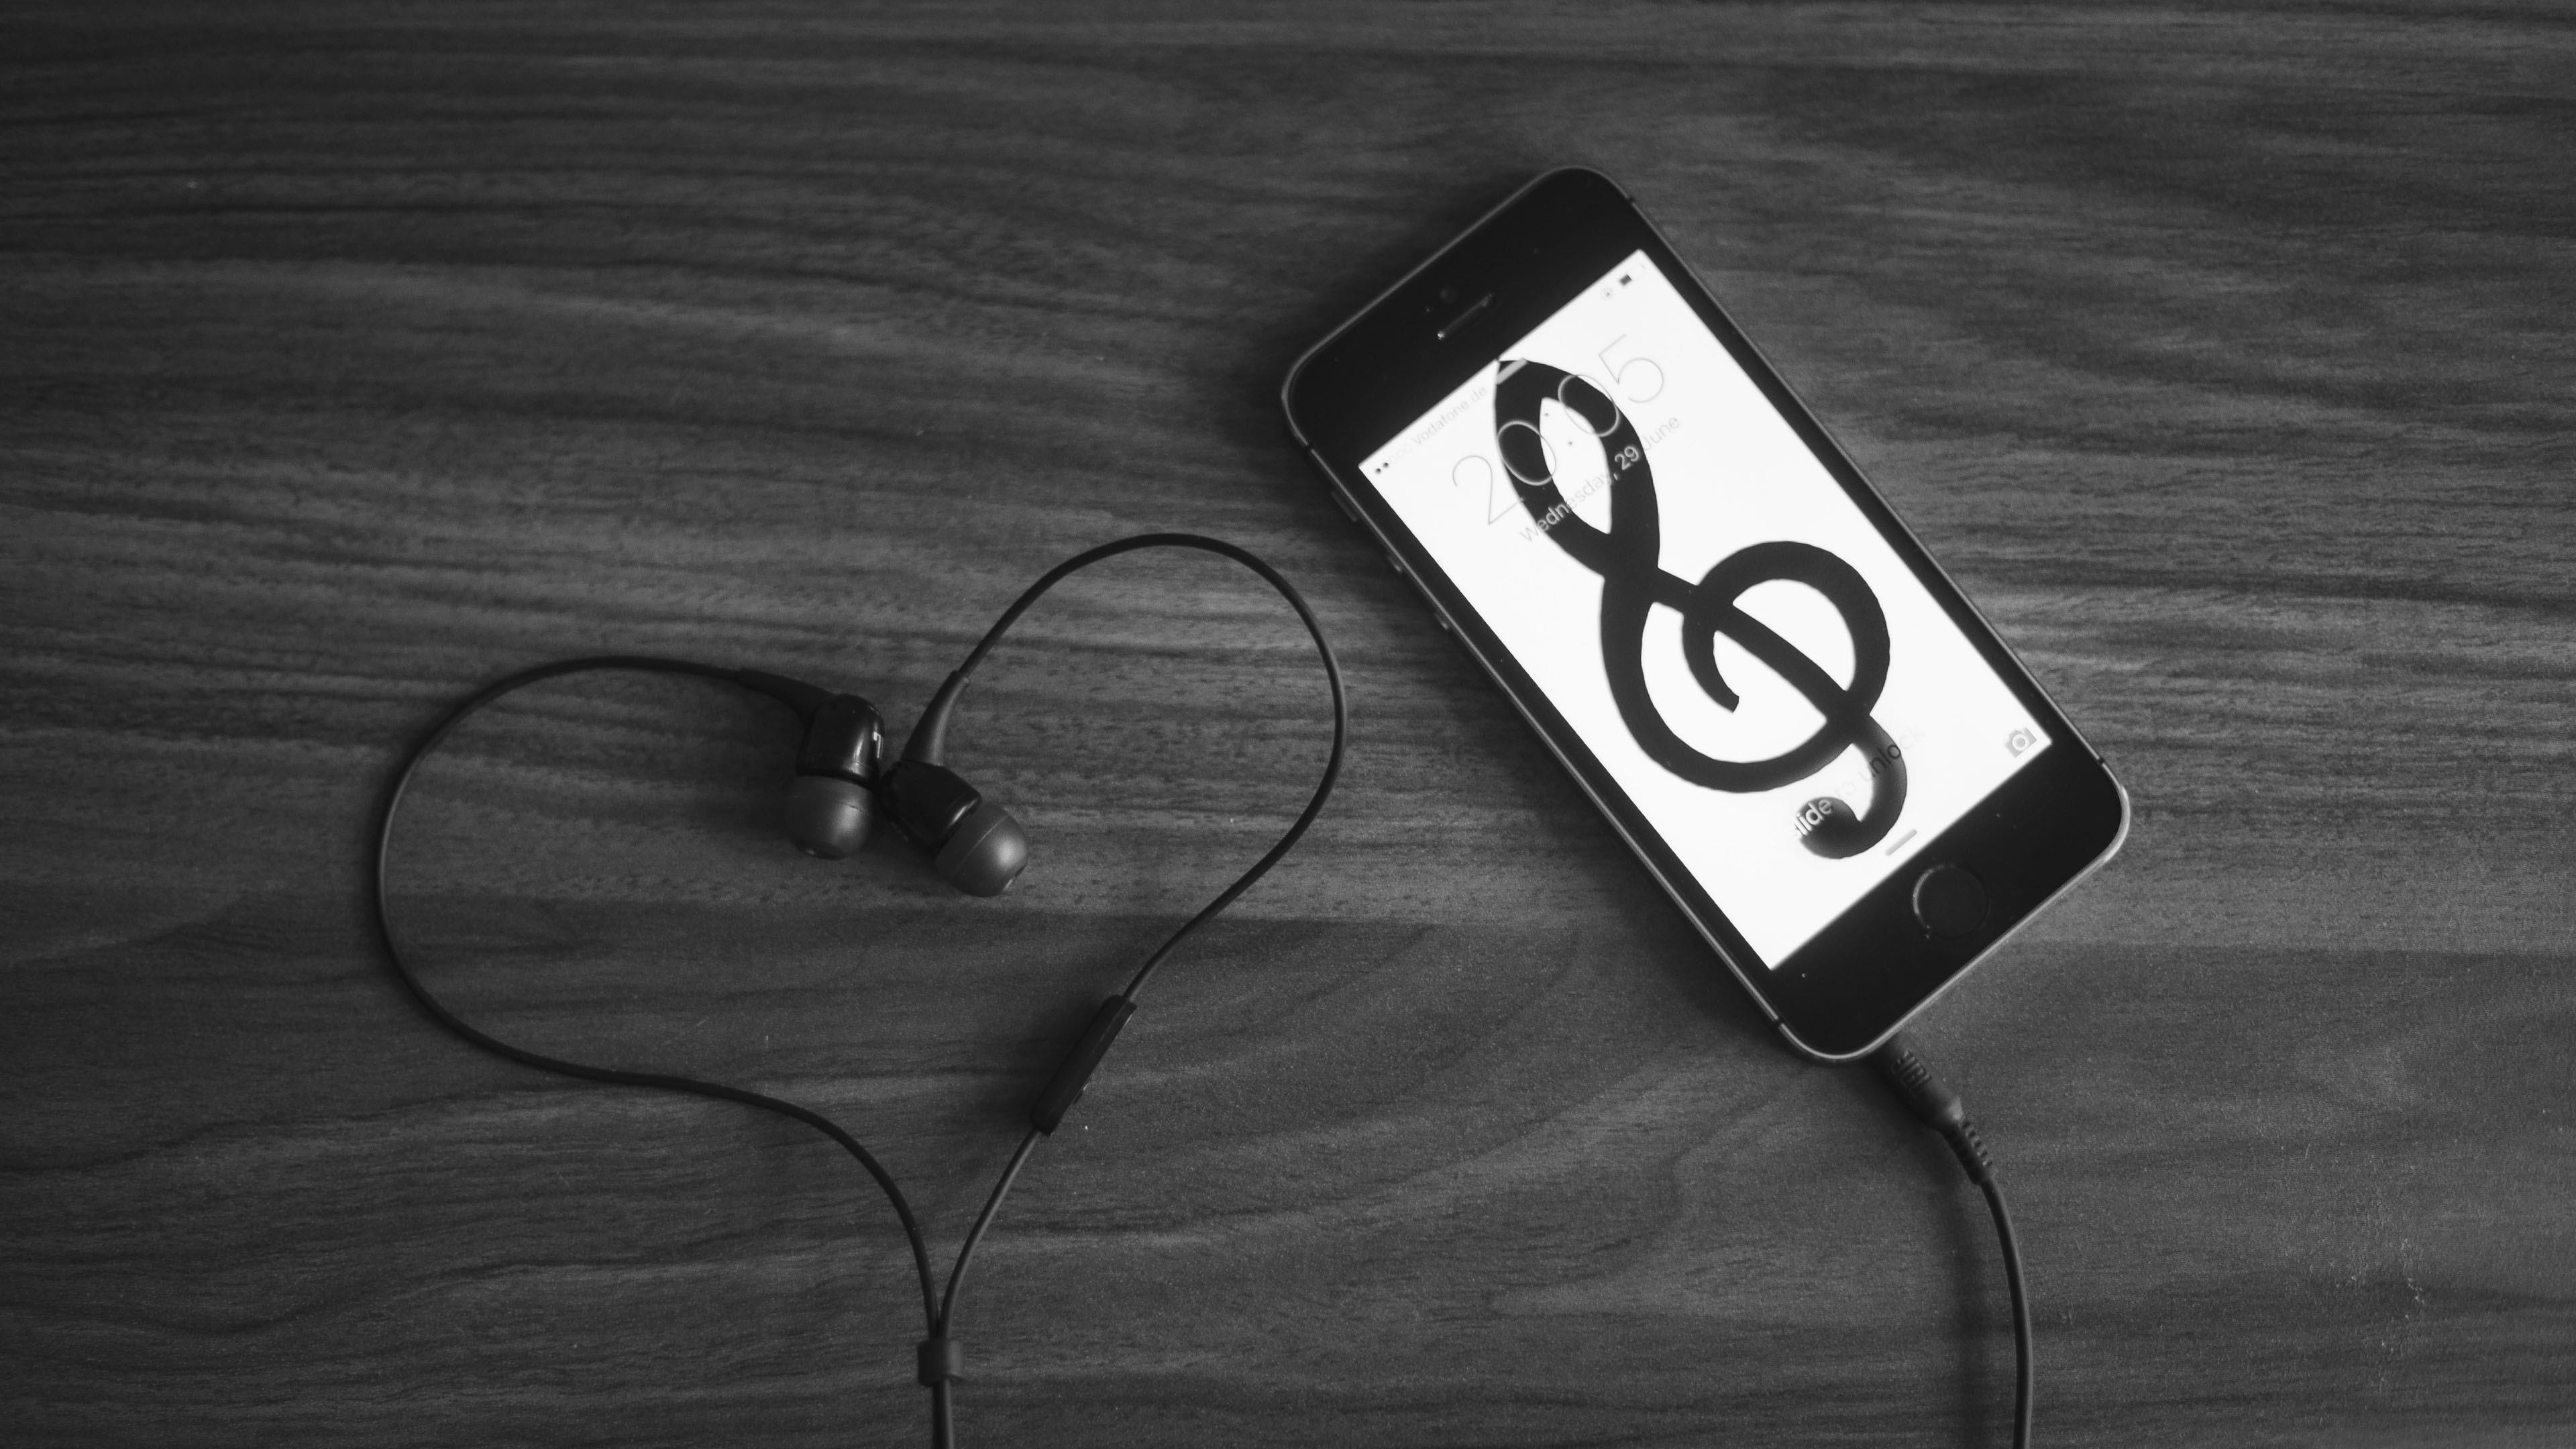 Treble Clef On The Cell Phone Wallpaper. Wallpaper Studio 10. Tens